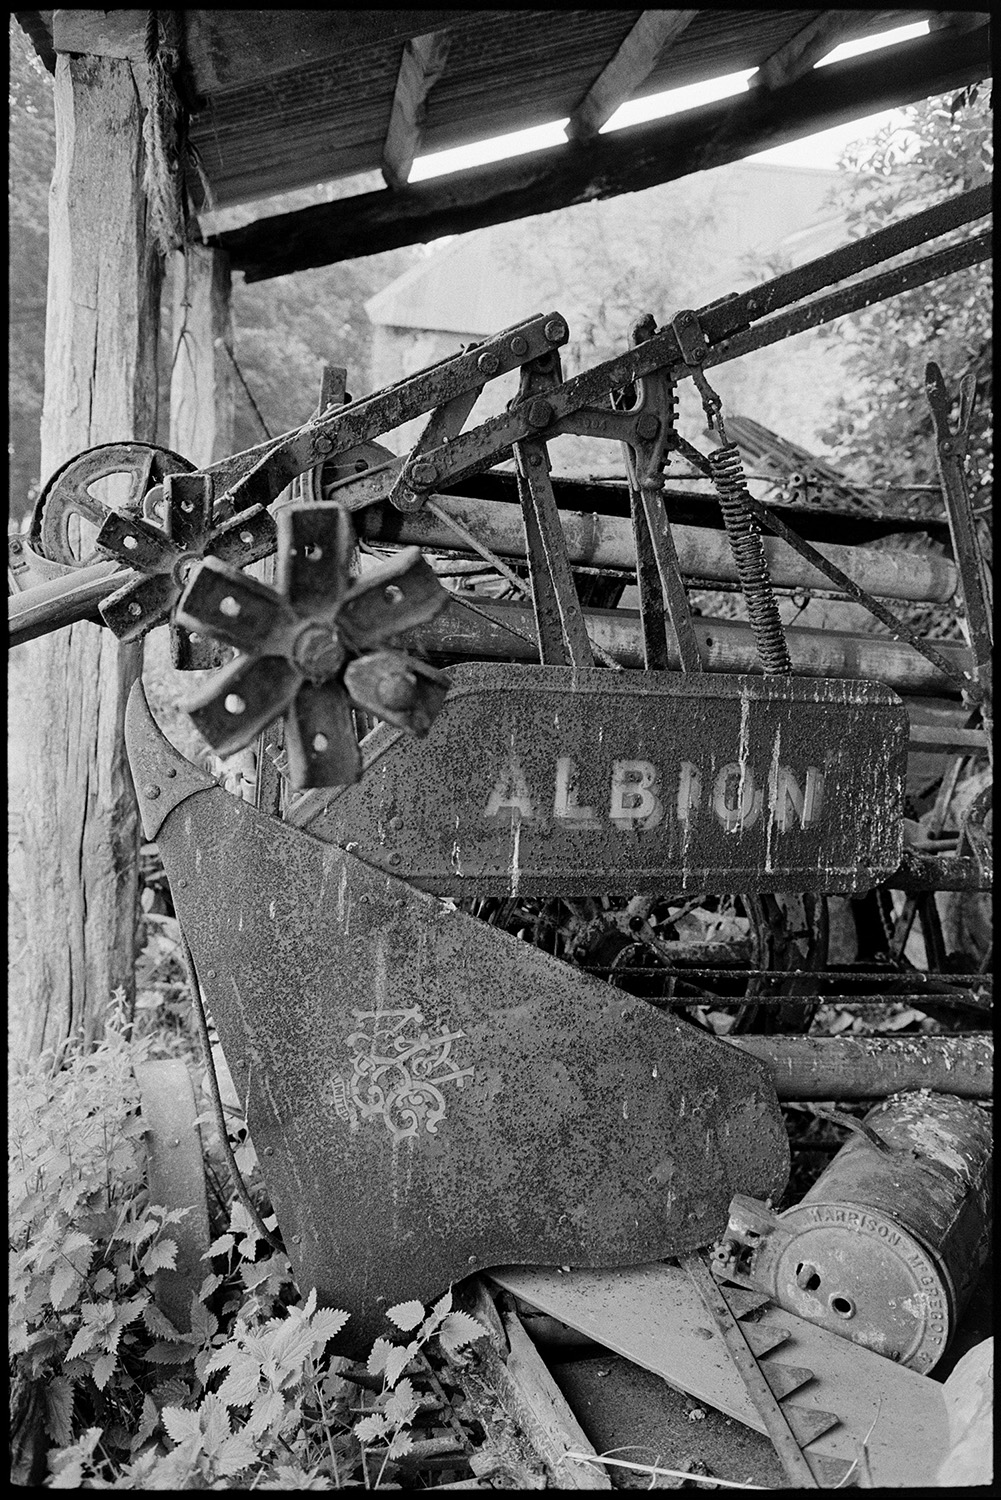 Reap and binder in shed. 
[An Albion Reap and Binder in an open barn at Densham, Ashreigney.]